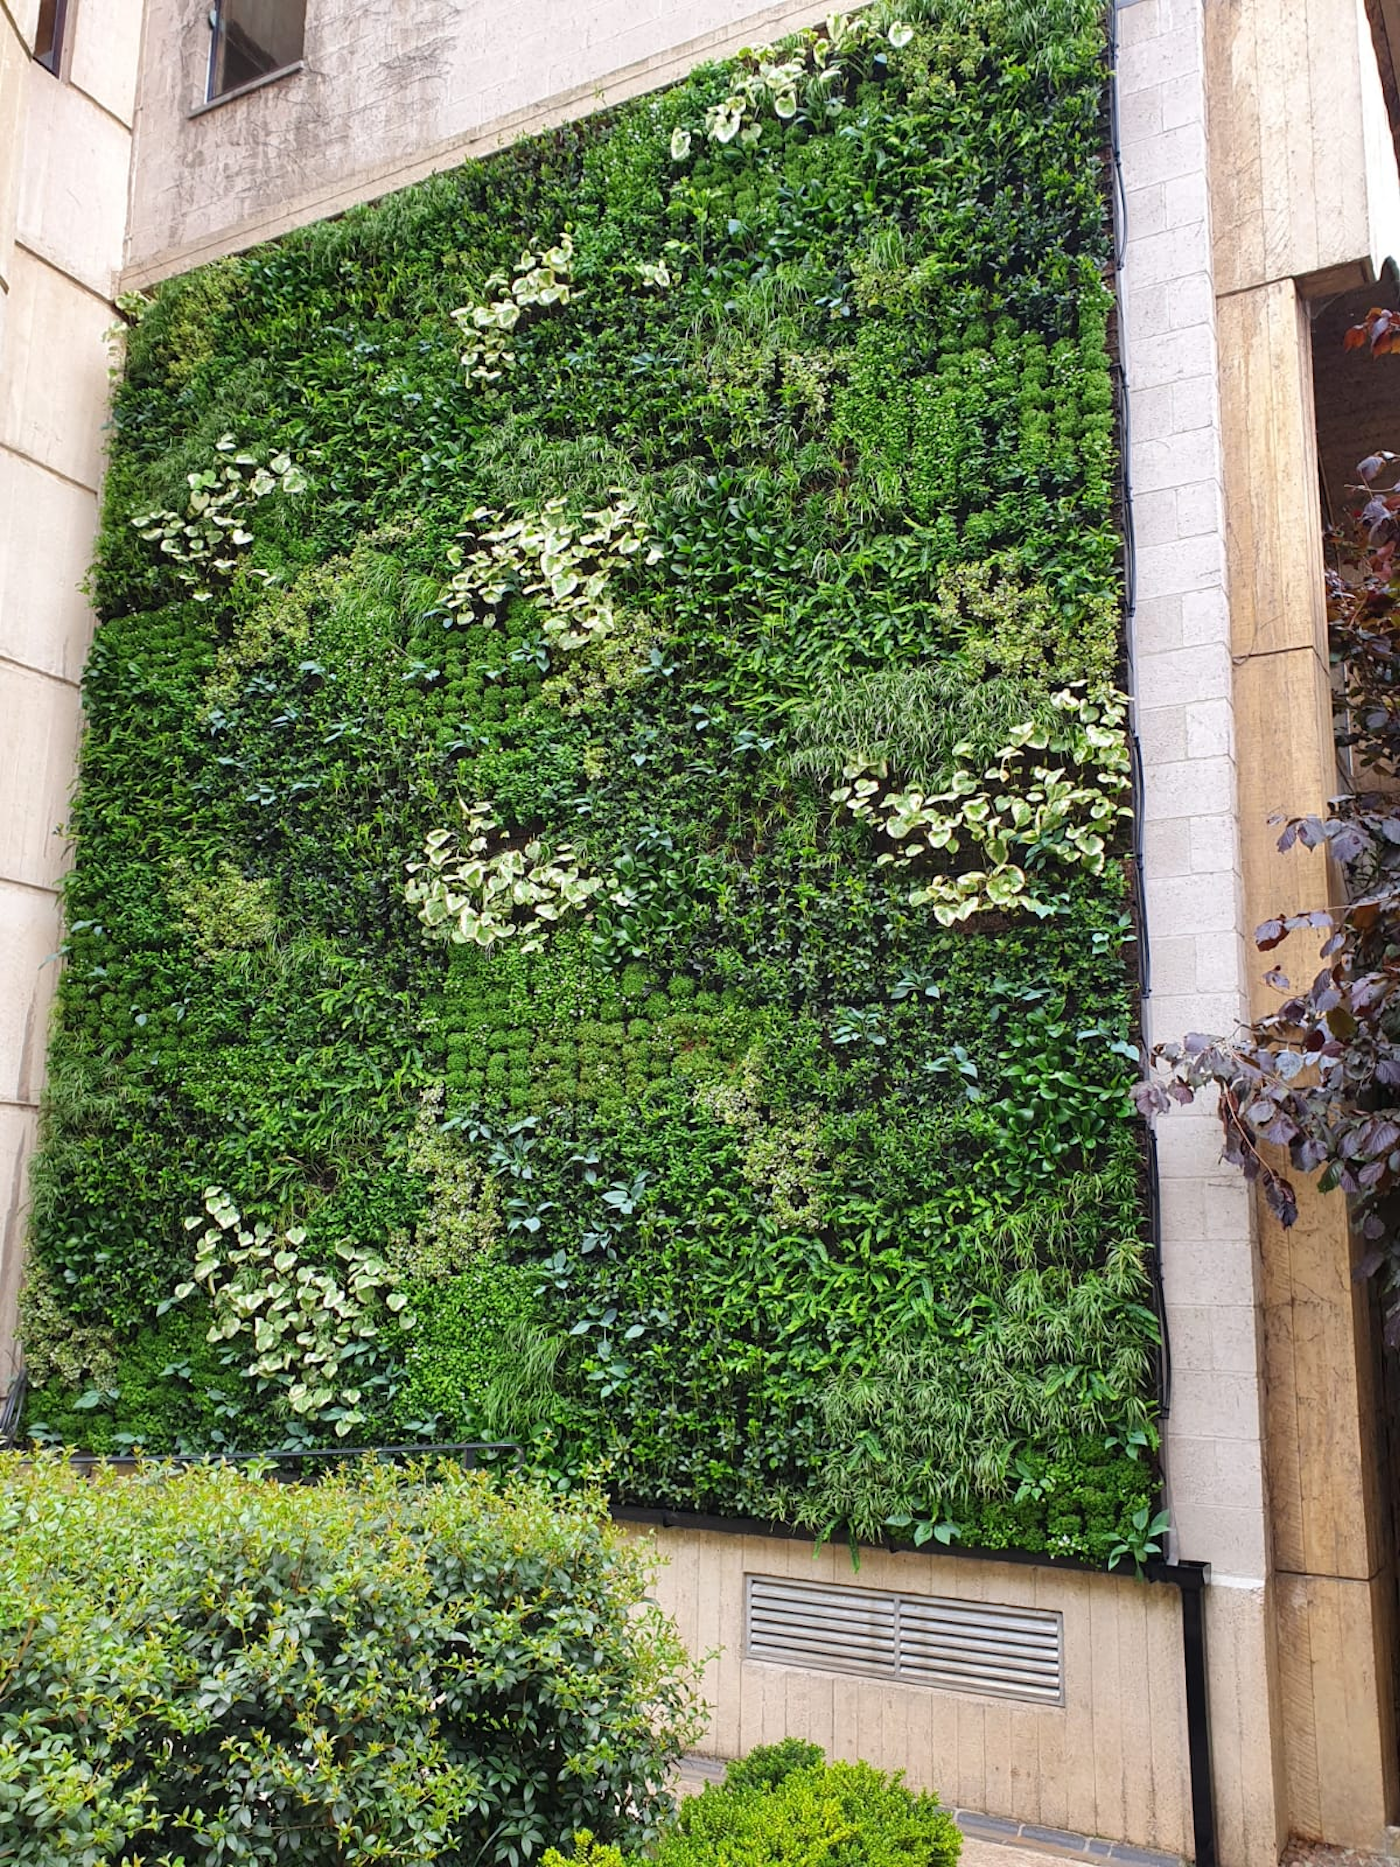 green wall with a variety of evergreen species